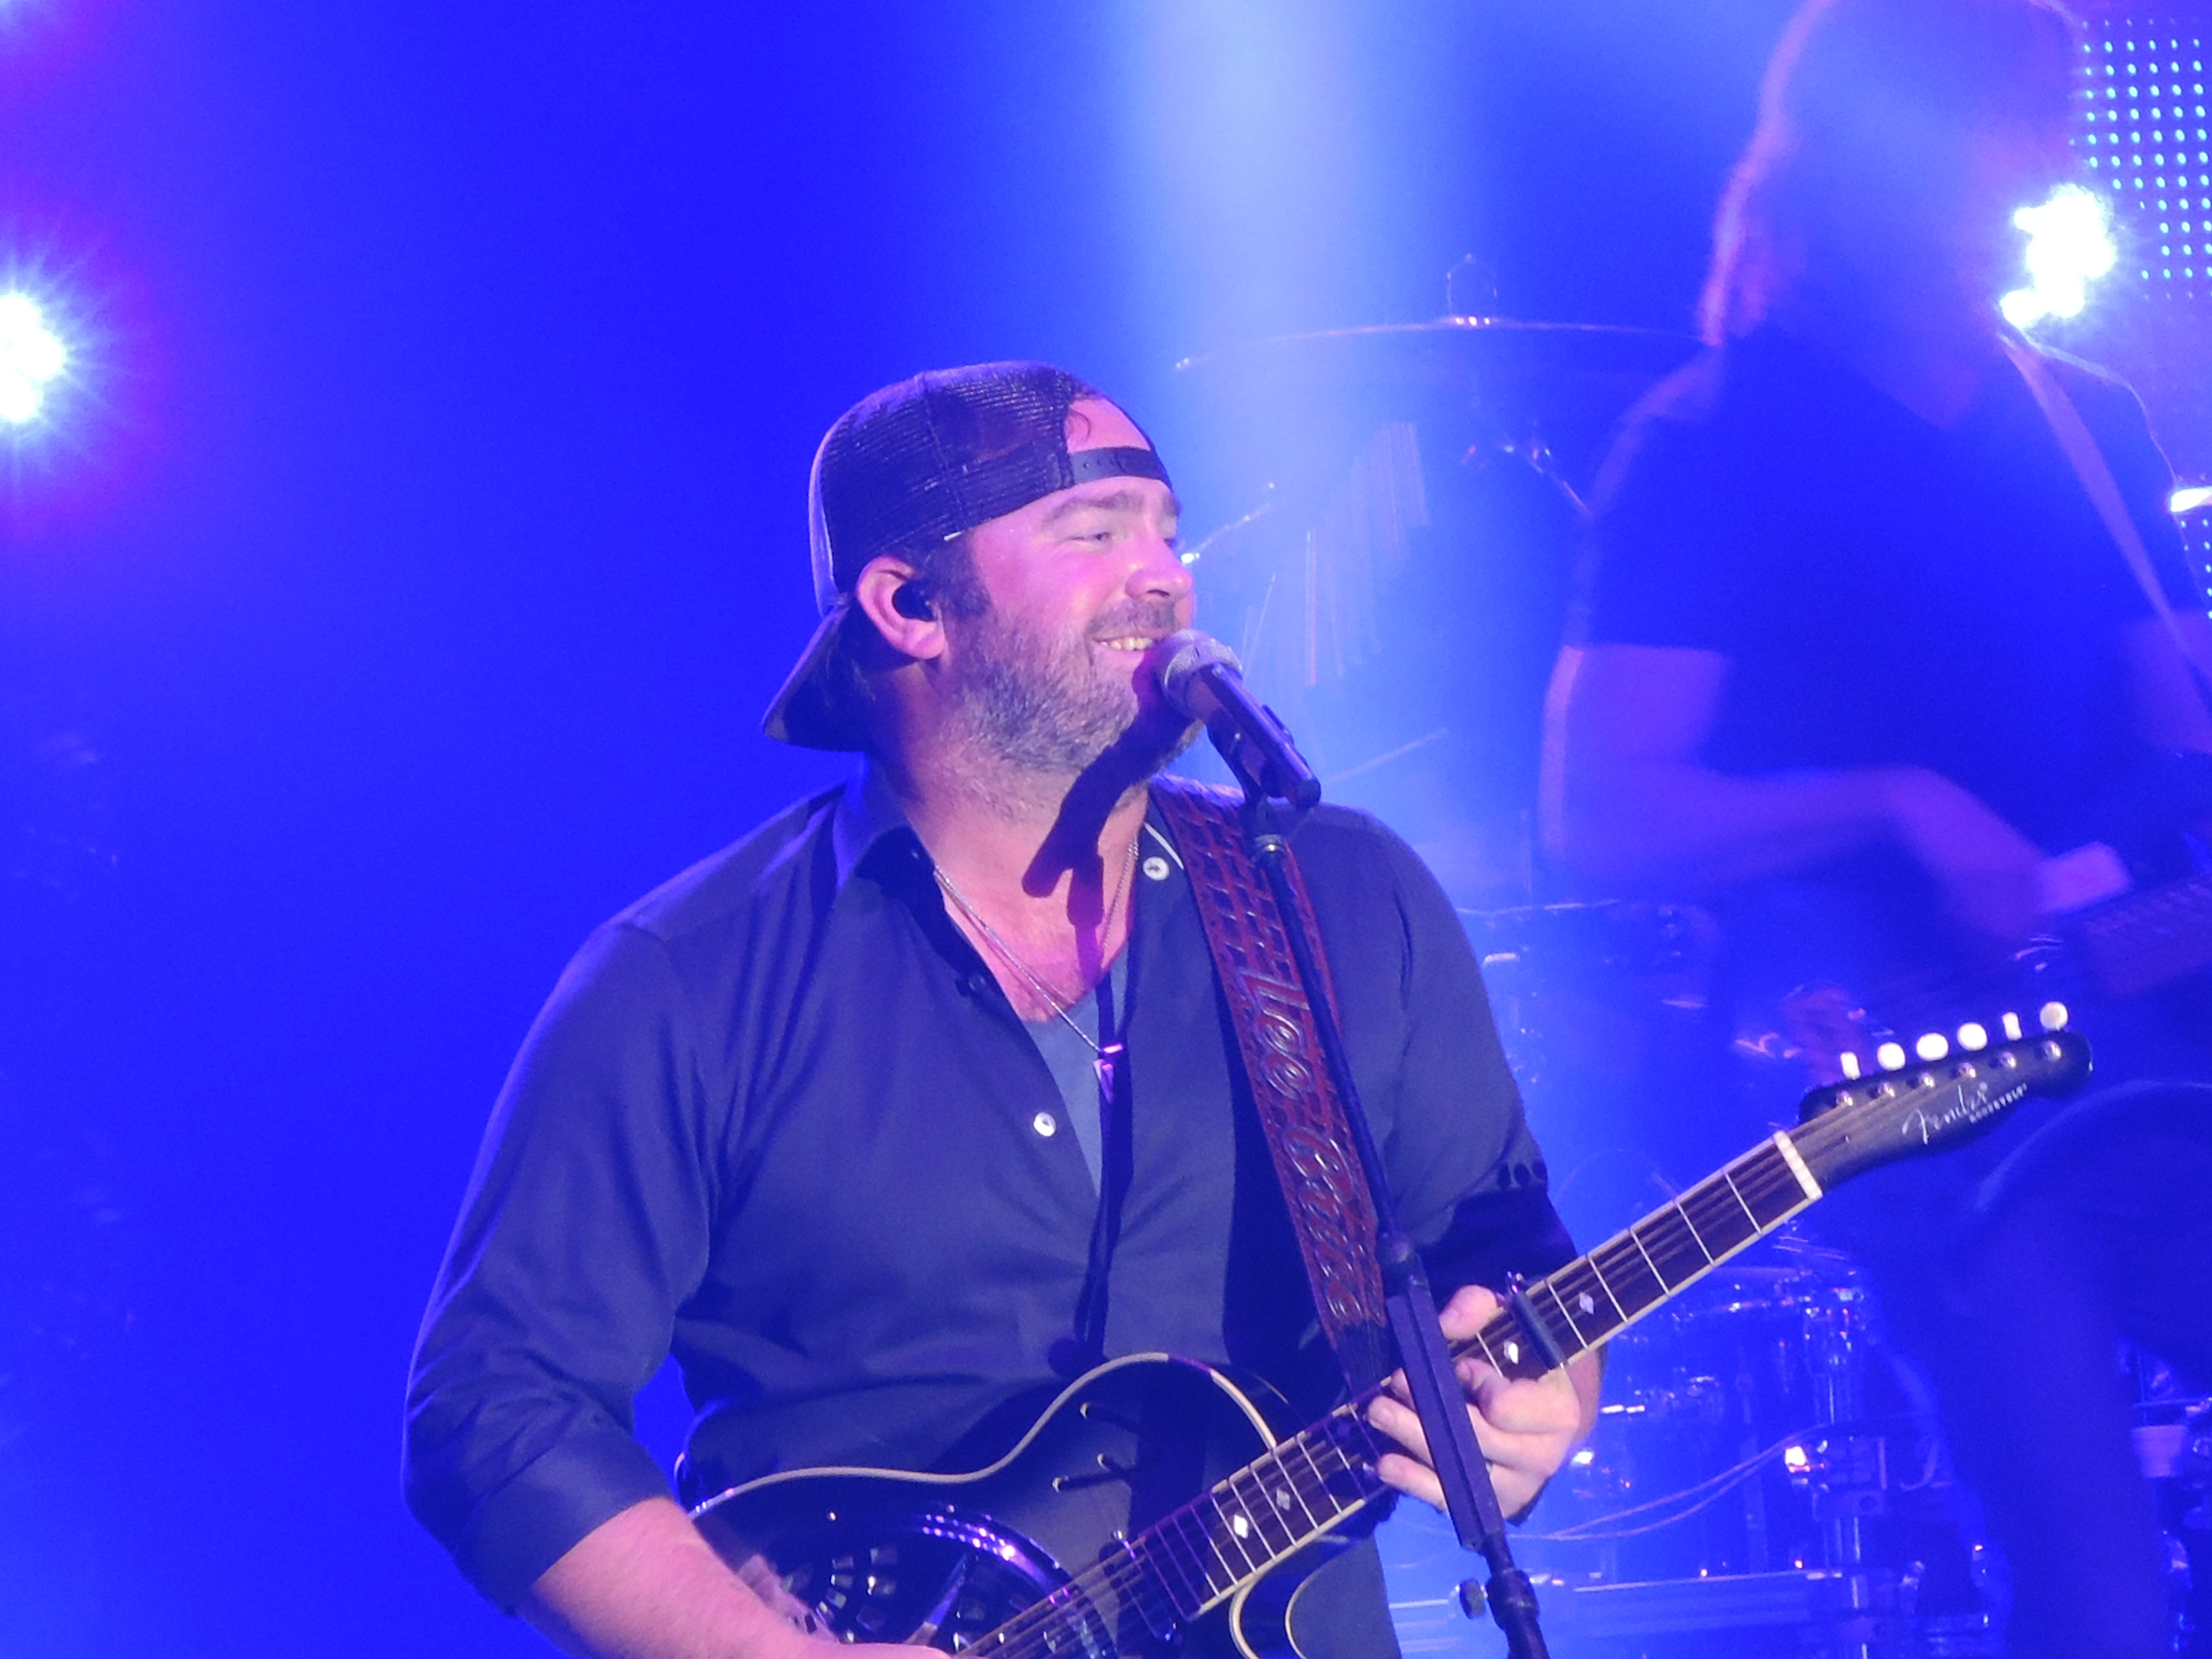 This is one of the photos I took at the Lee Brice concert on Friday night.